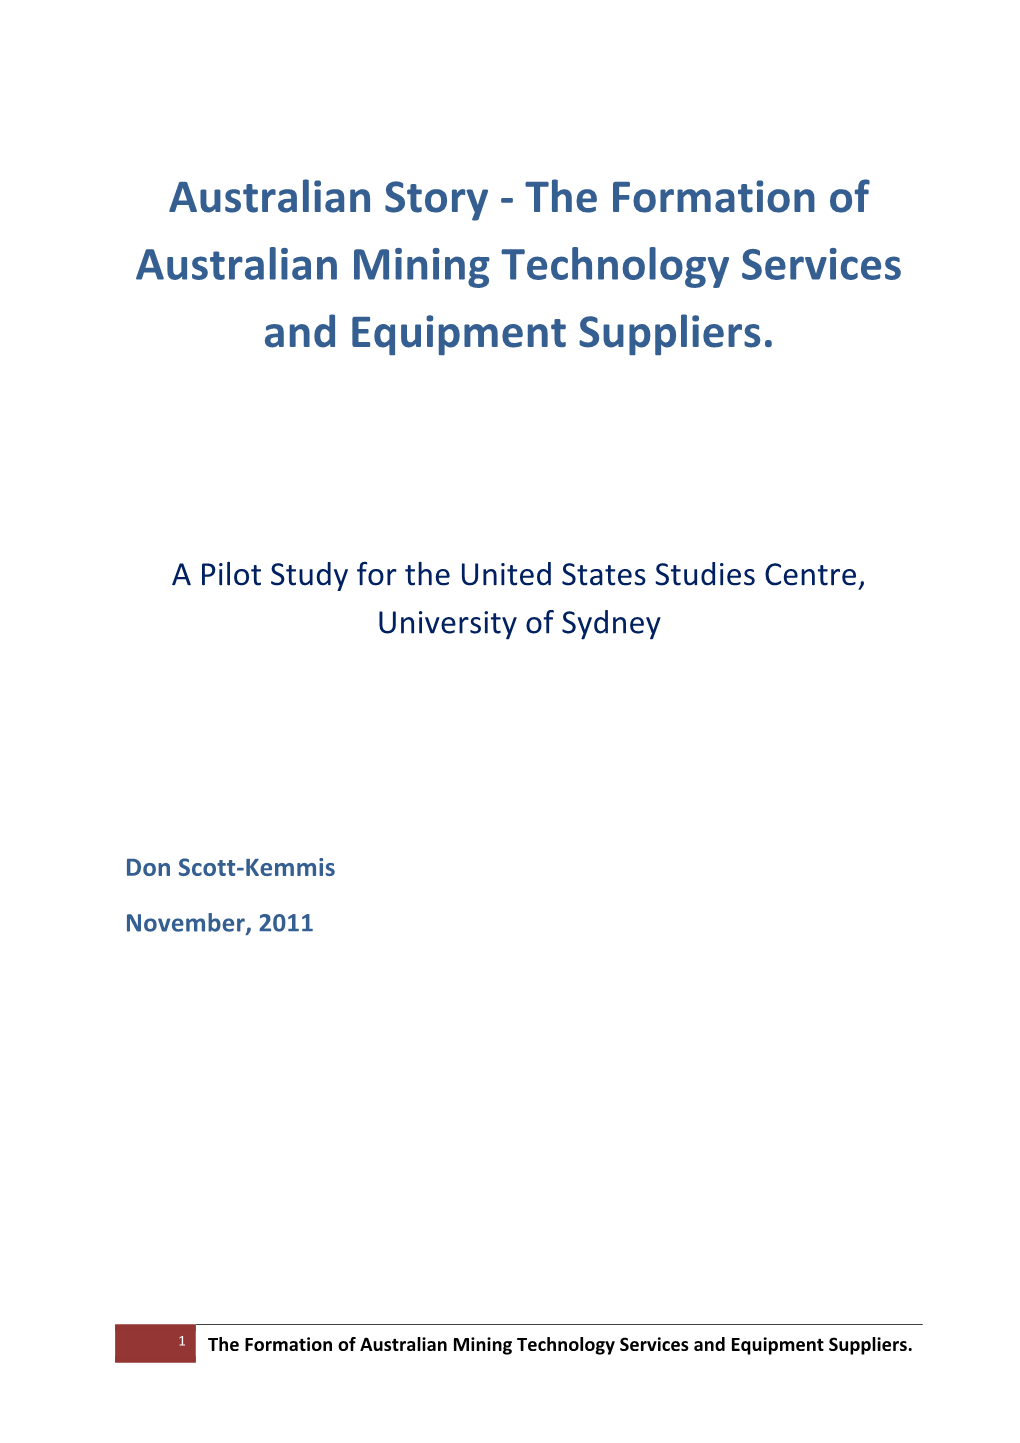 The Formation of Australian Mining Technology Services and Equipment Suppliers